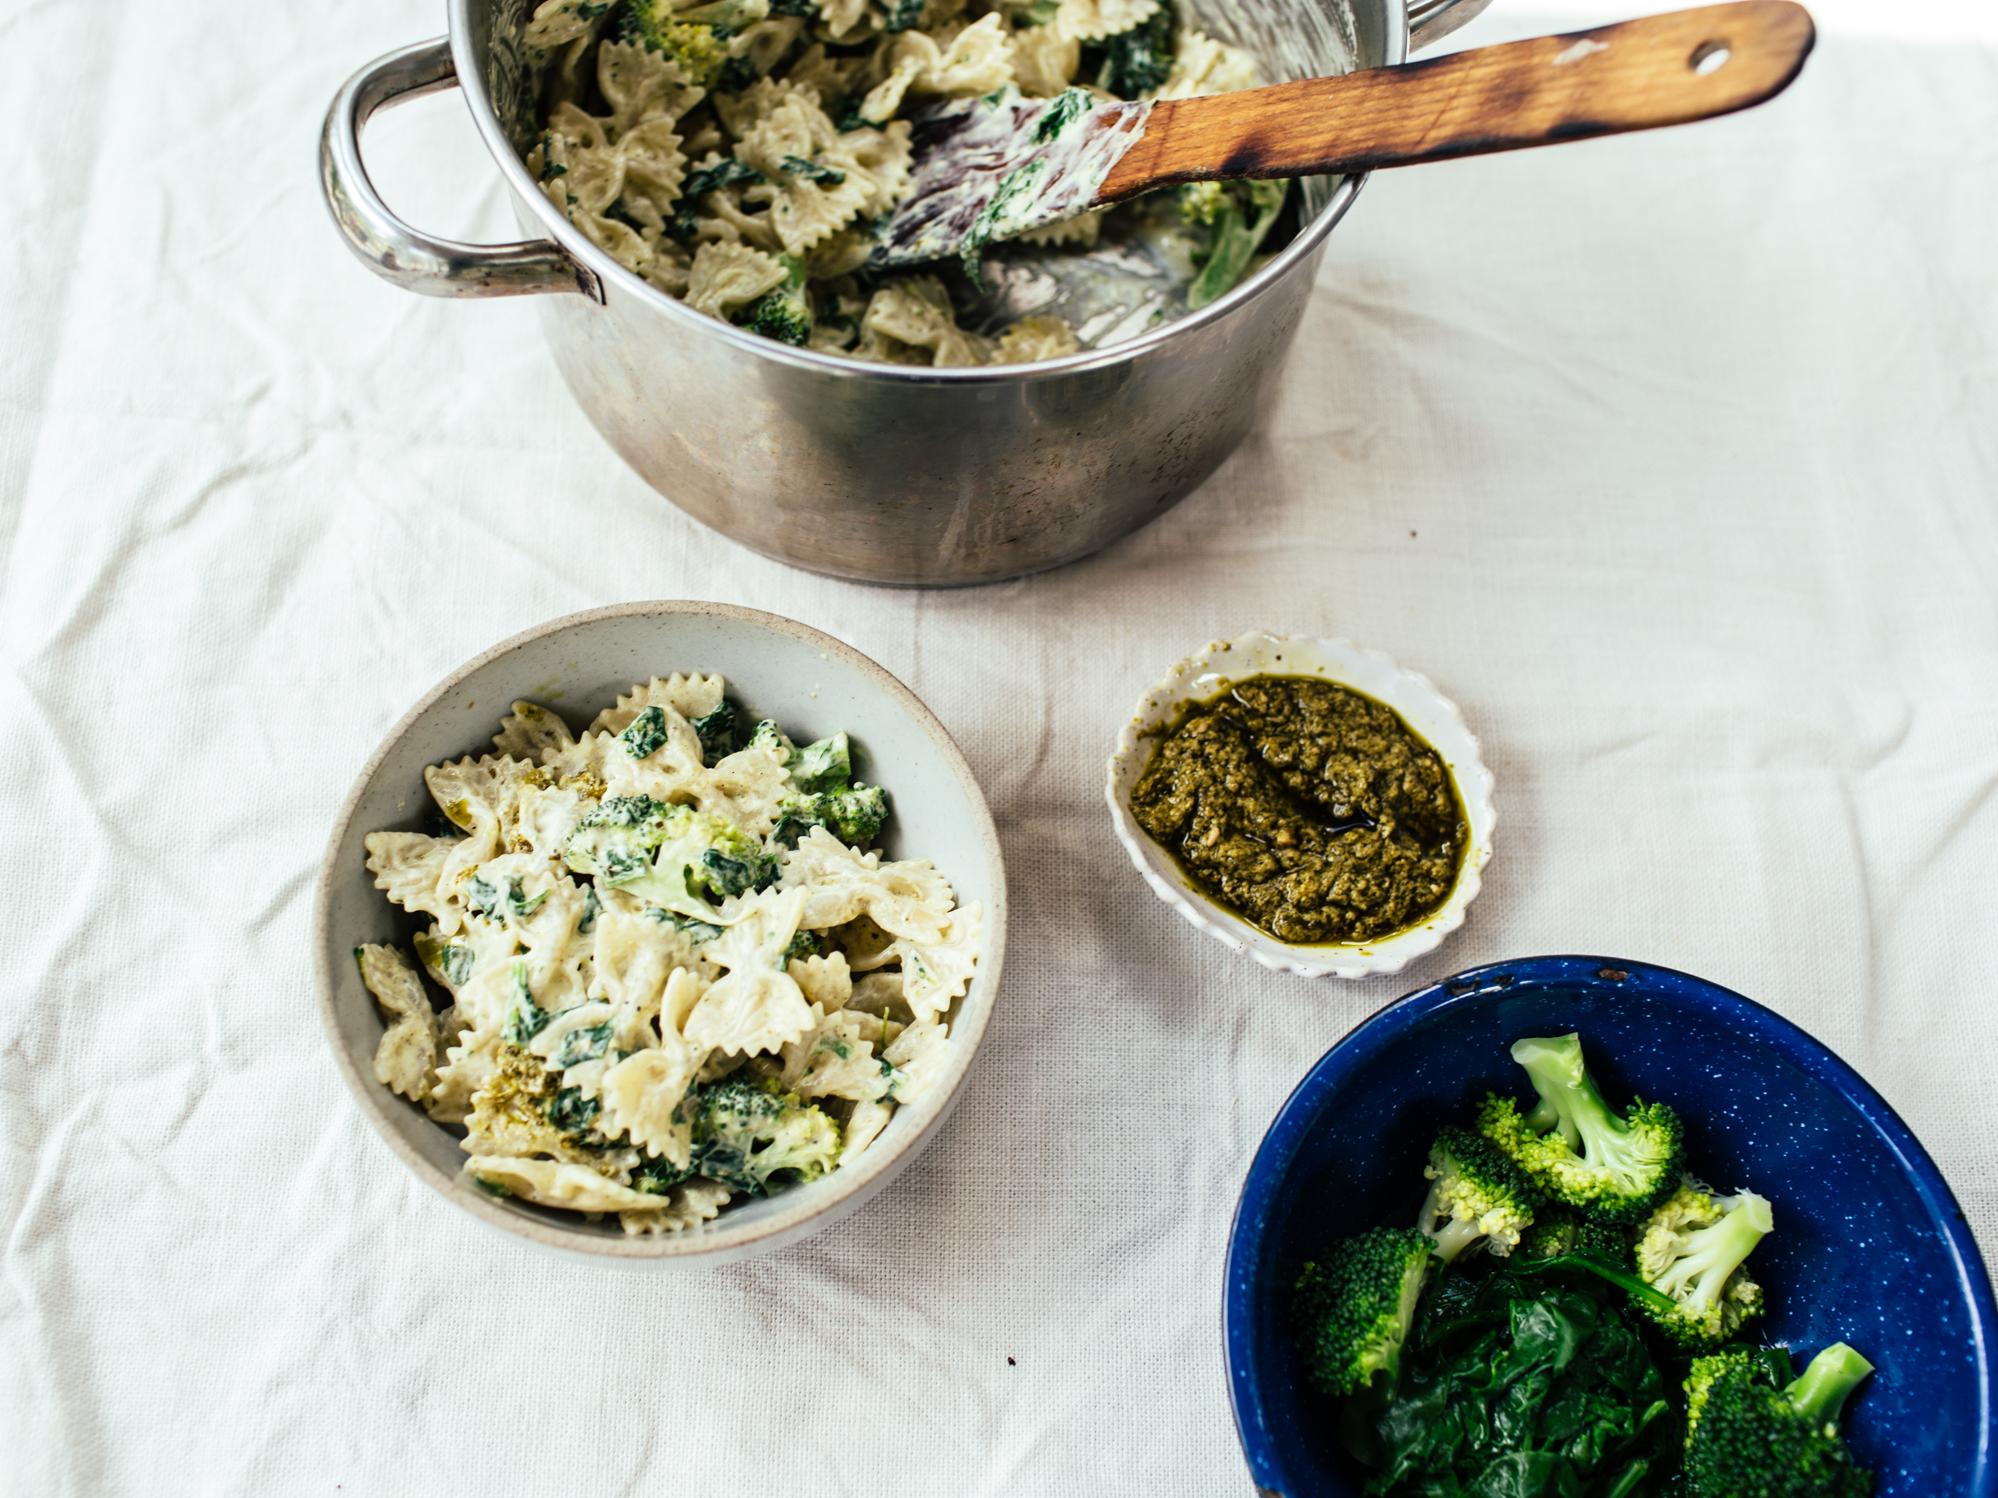  Indulge in this creamy vegan pesto pasta with broccoli and satisfy your cravings!